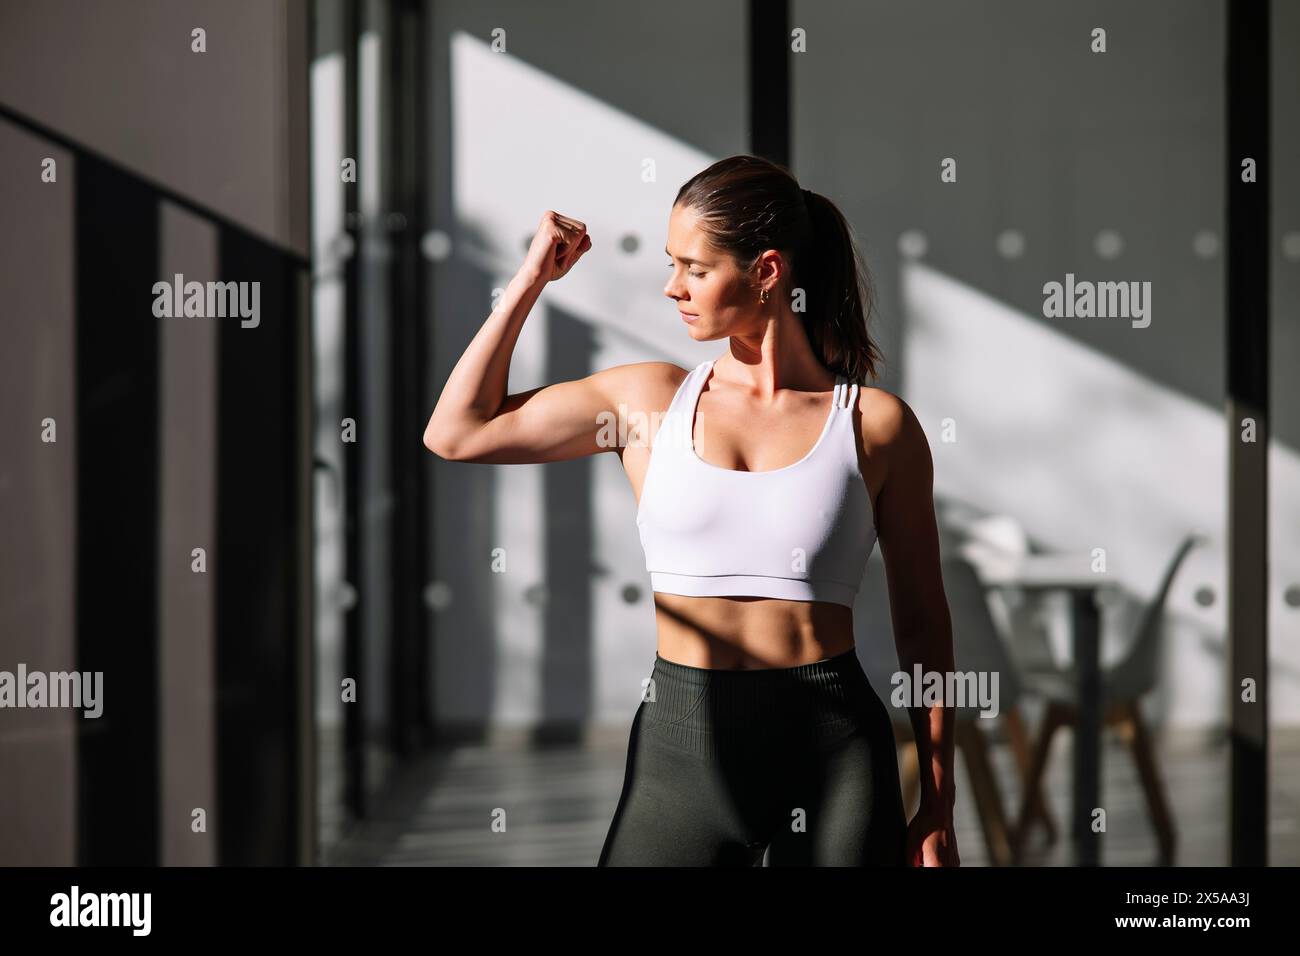 A physically fit woman in sportswear flexes her muscles while exercising at home, showcasing strength and wellness Stock Photo